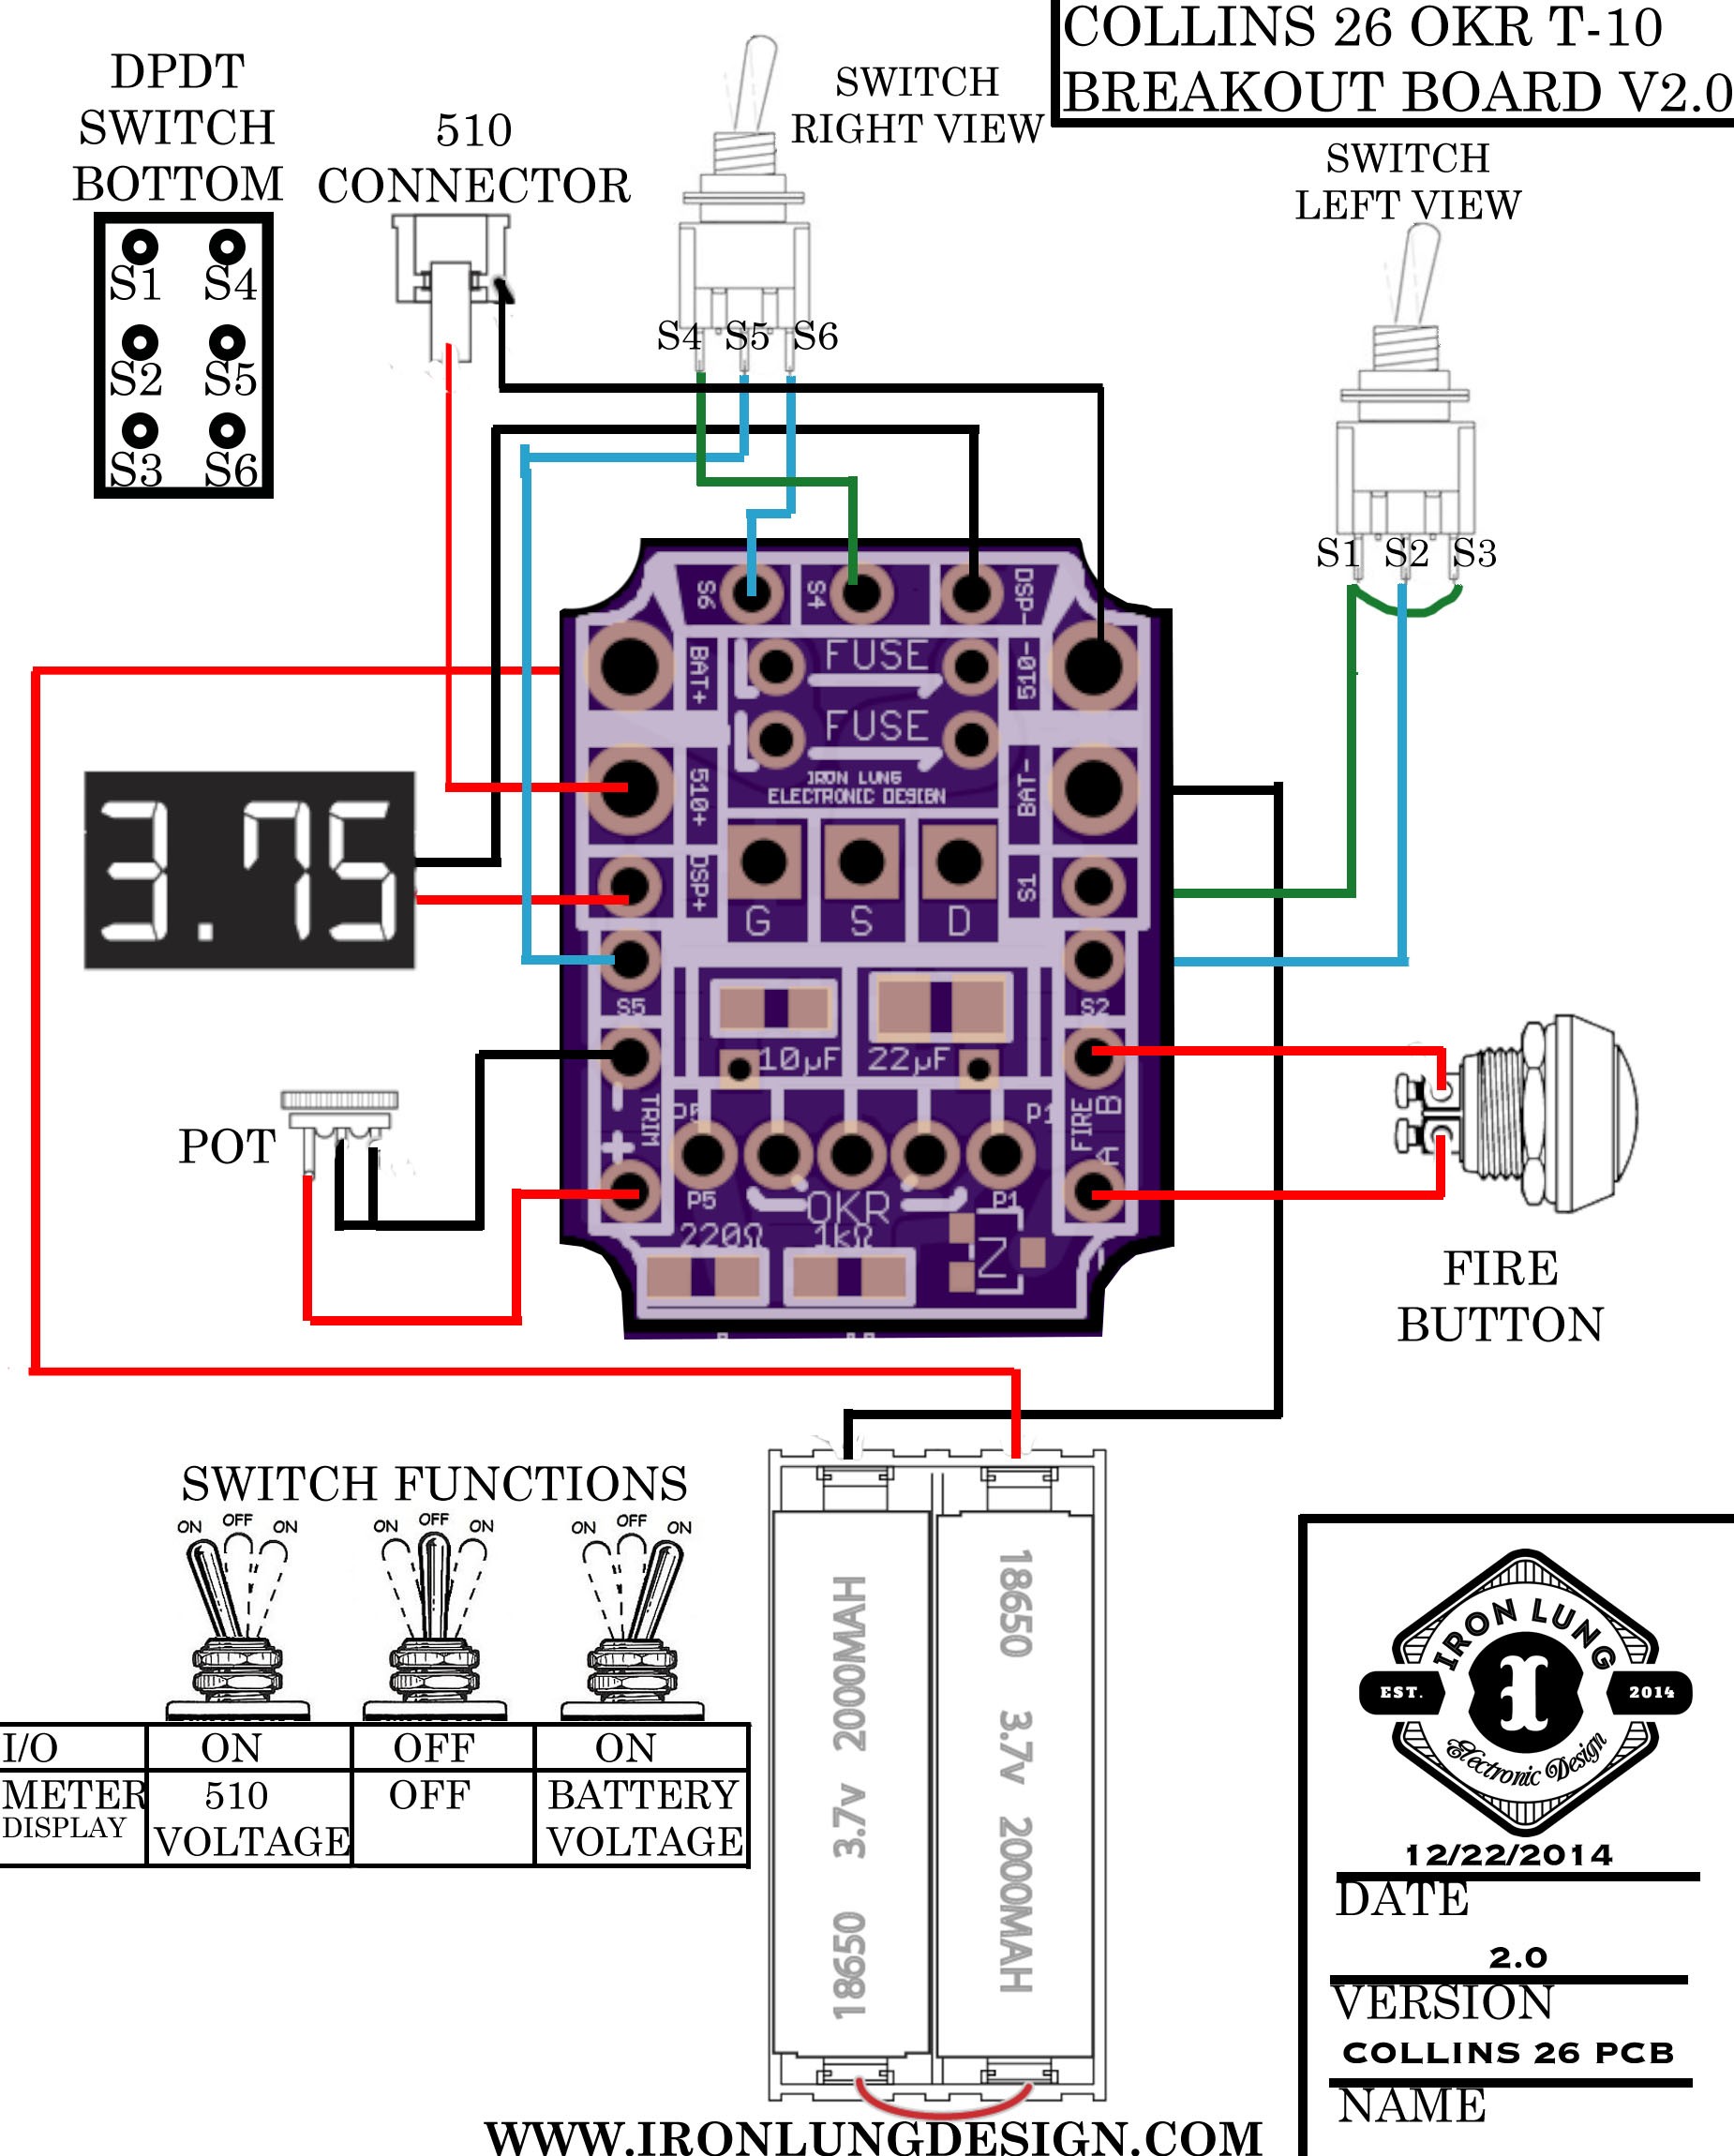 Unregulated Box Mod Wiring Diagram from mainetreasurechest.com